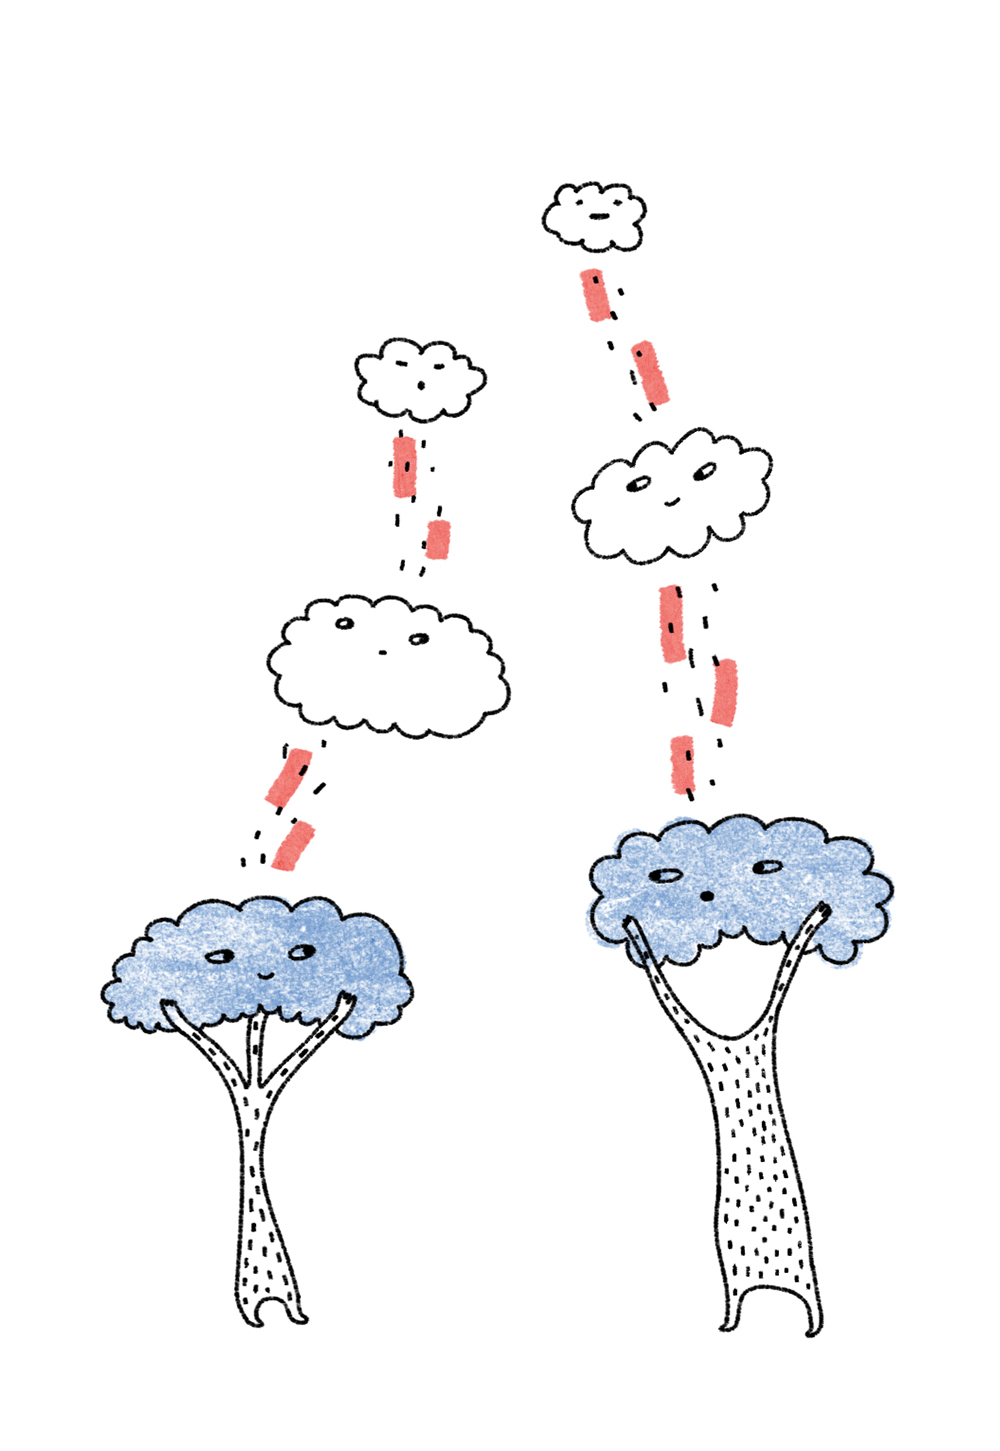 Cloud Making Trees - Sketch by ChiChiLand